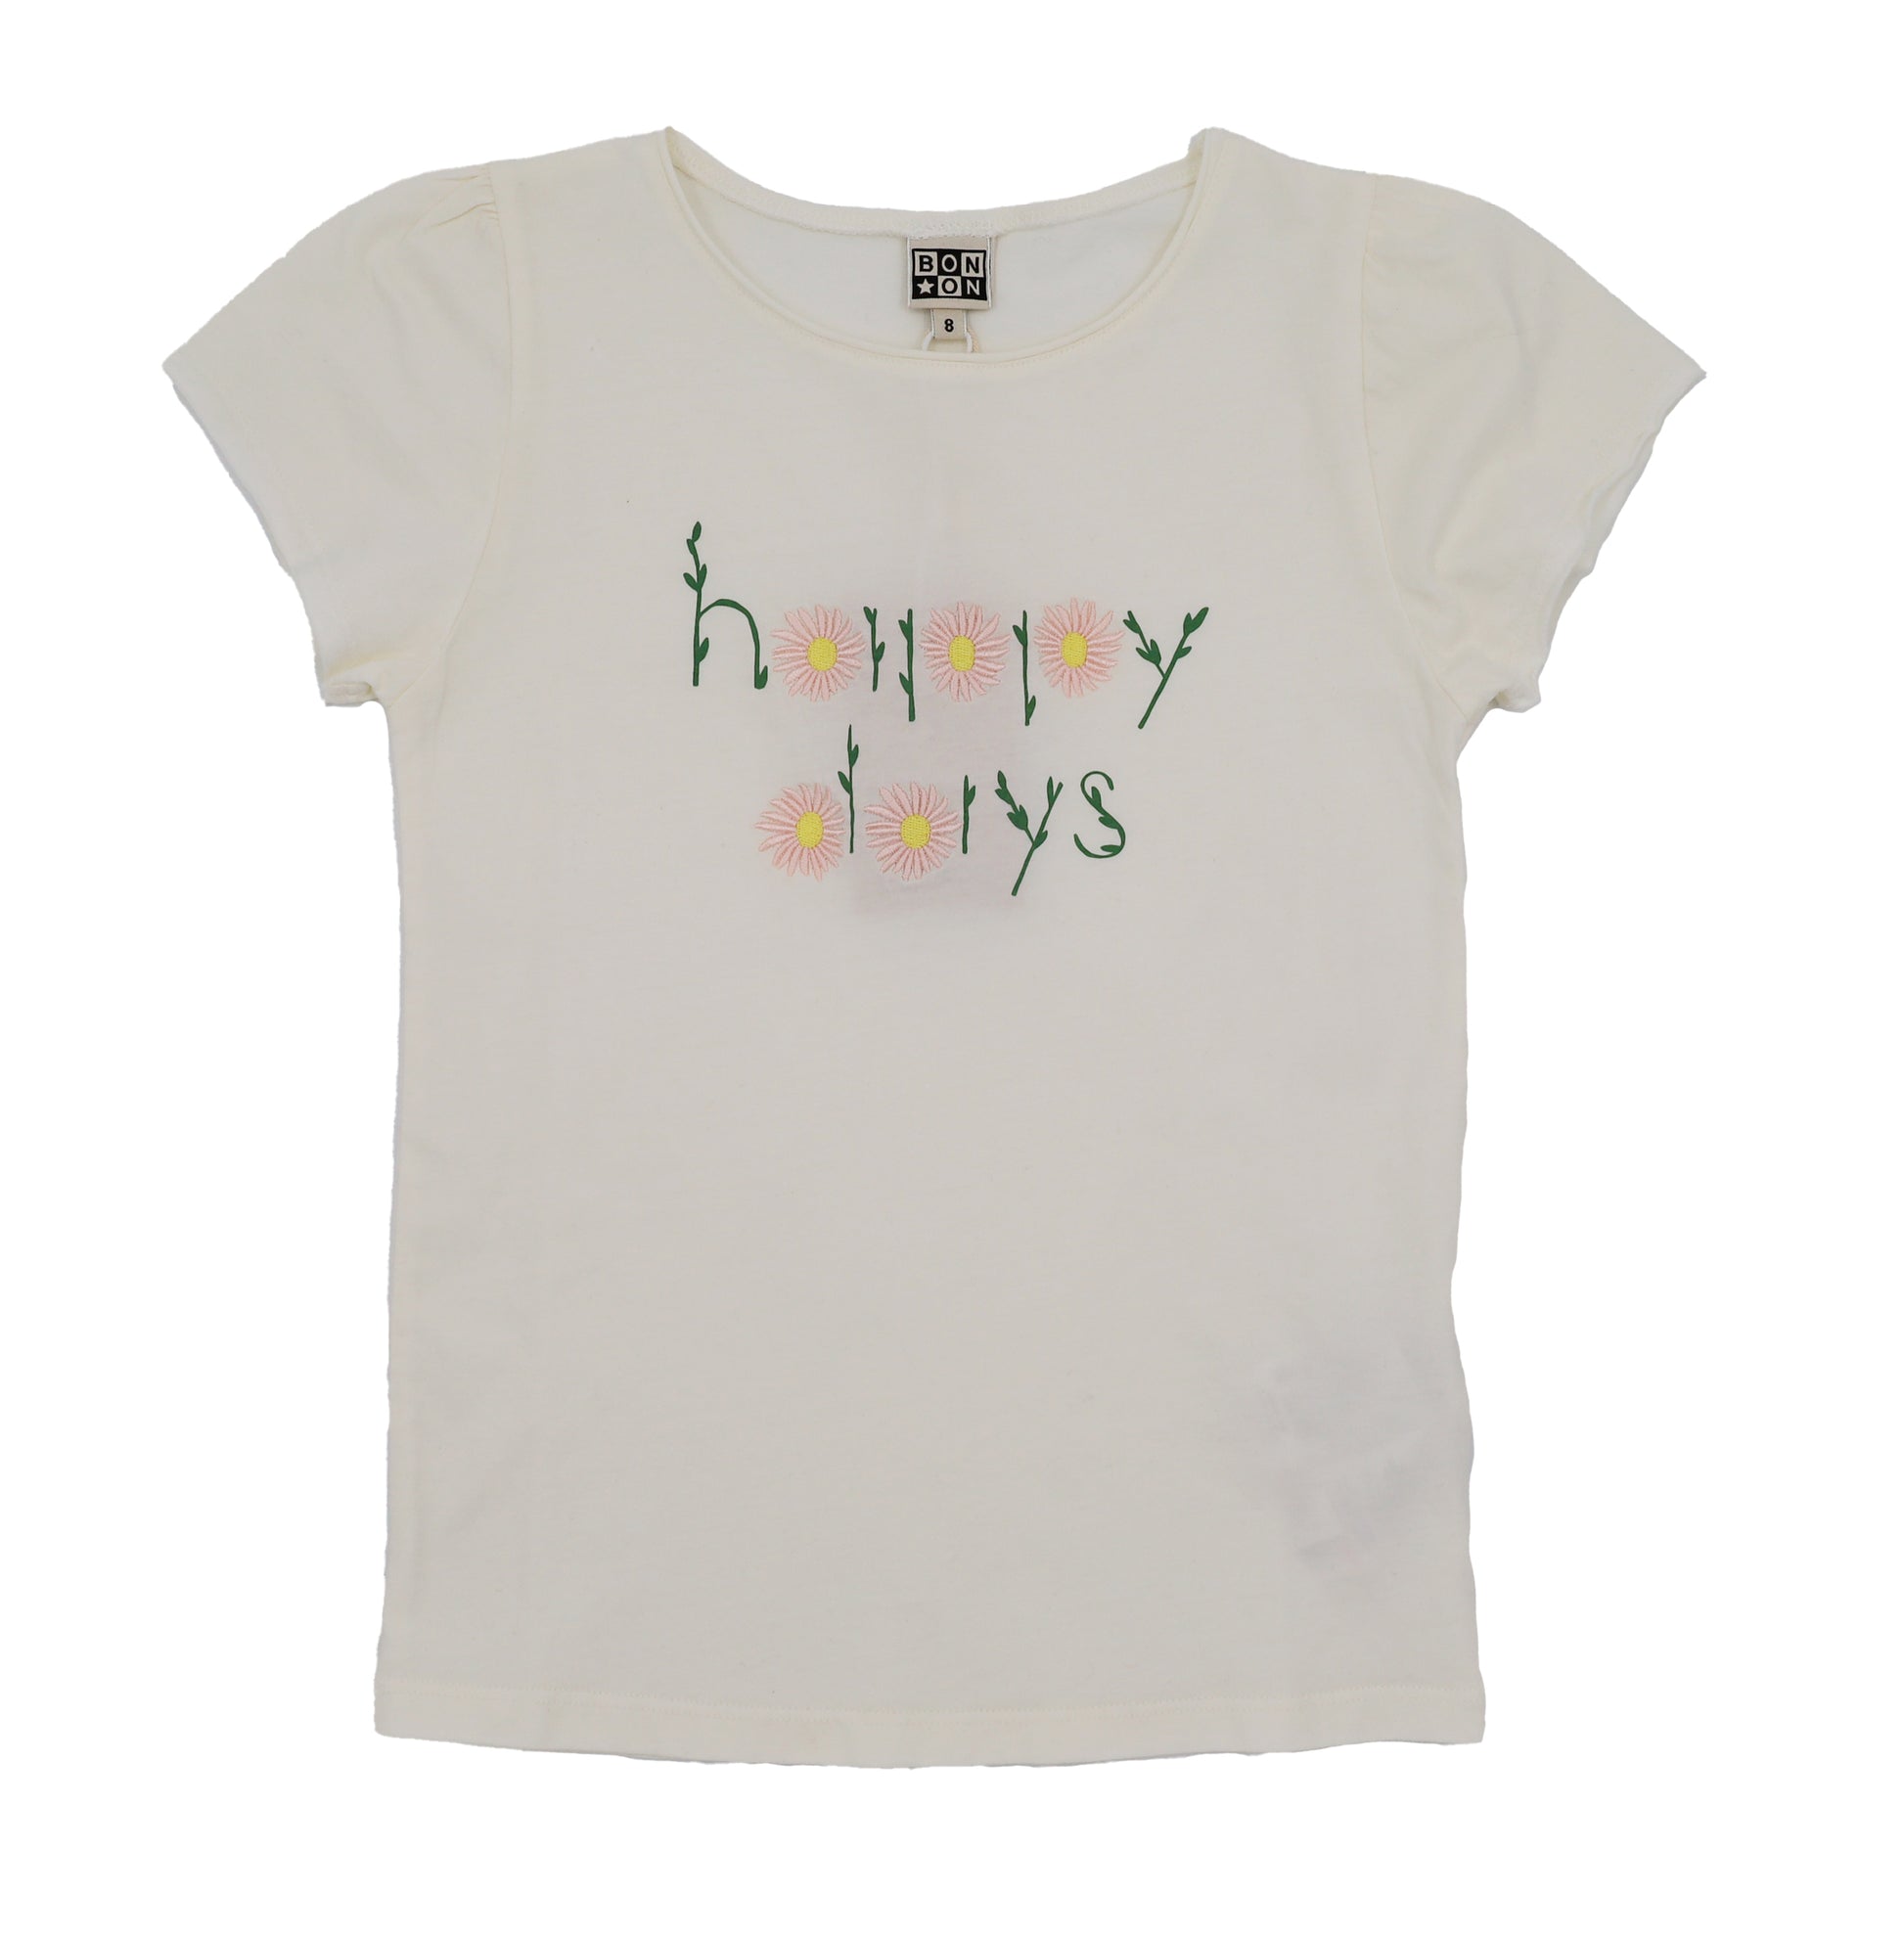 OH” Happy Days Essential T-Shirt for Sale by Robmac11